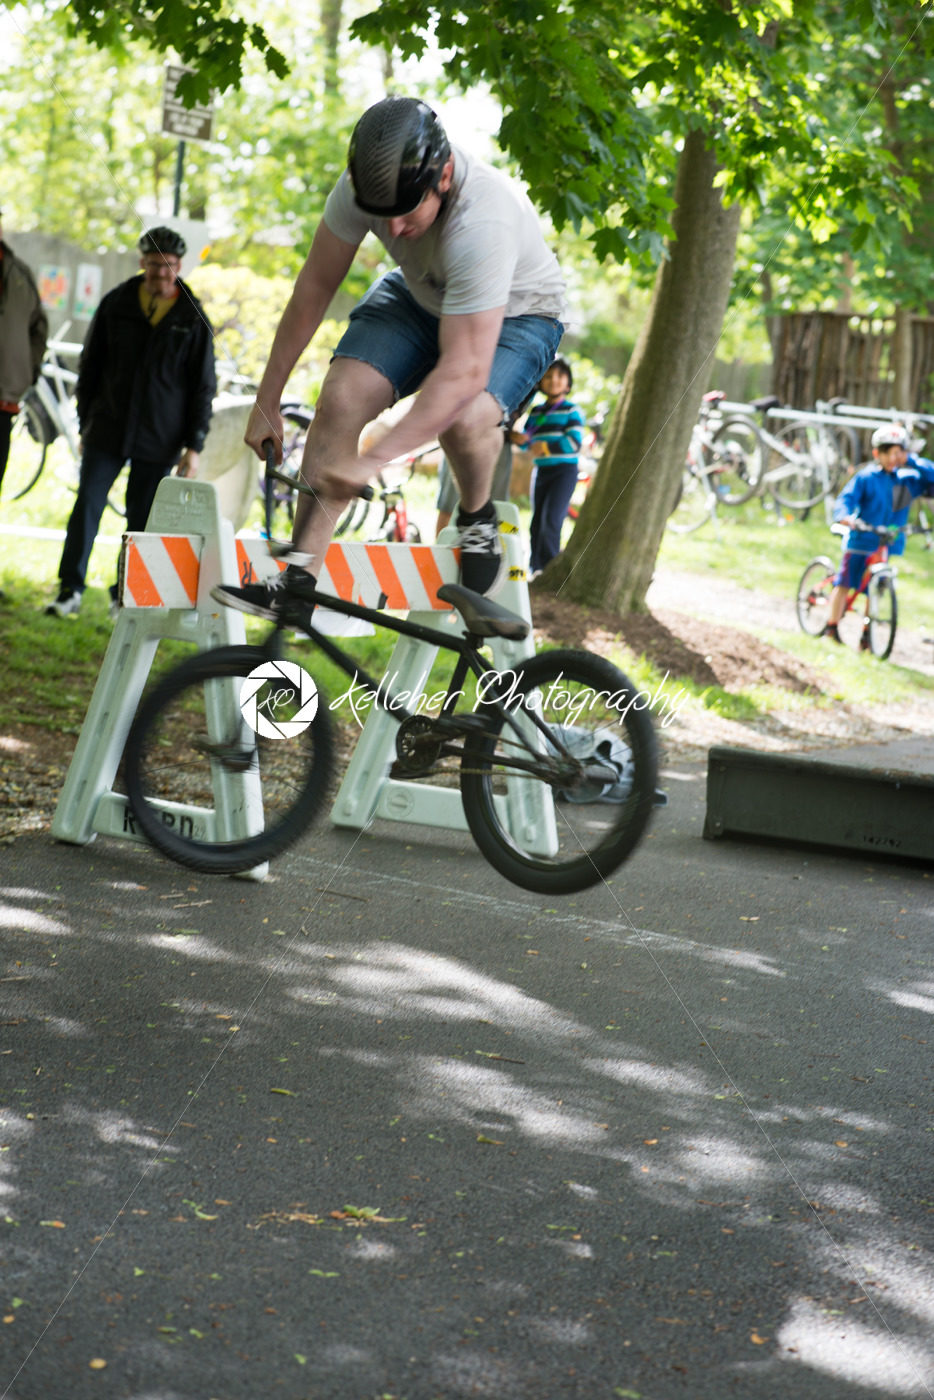 RADNOR TOWNSHIP, PA – MAY 7: BMX Stunt Performance by Chris Aceto at the Radnor Township Bike Rodeo on May 7, 2017 - Kelleher Photography Store